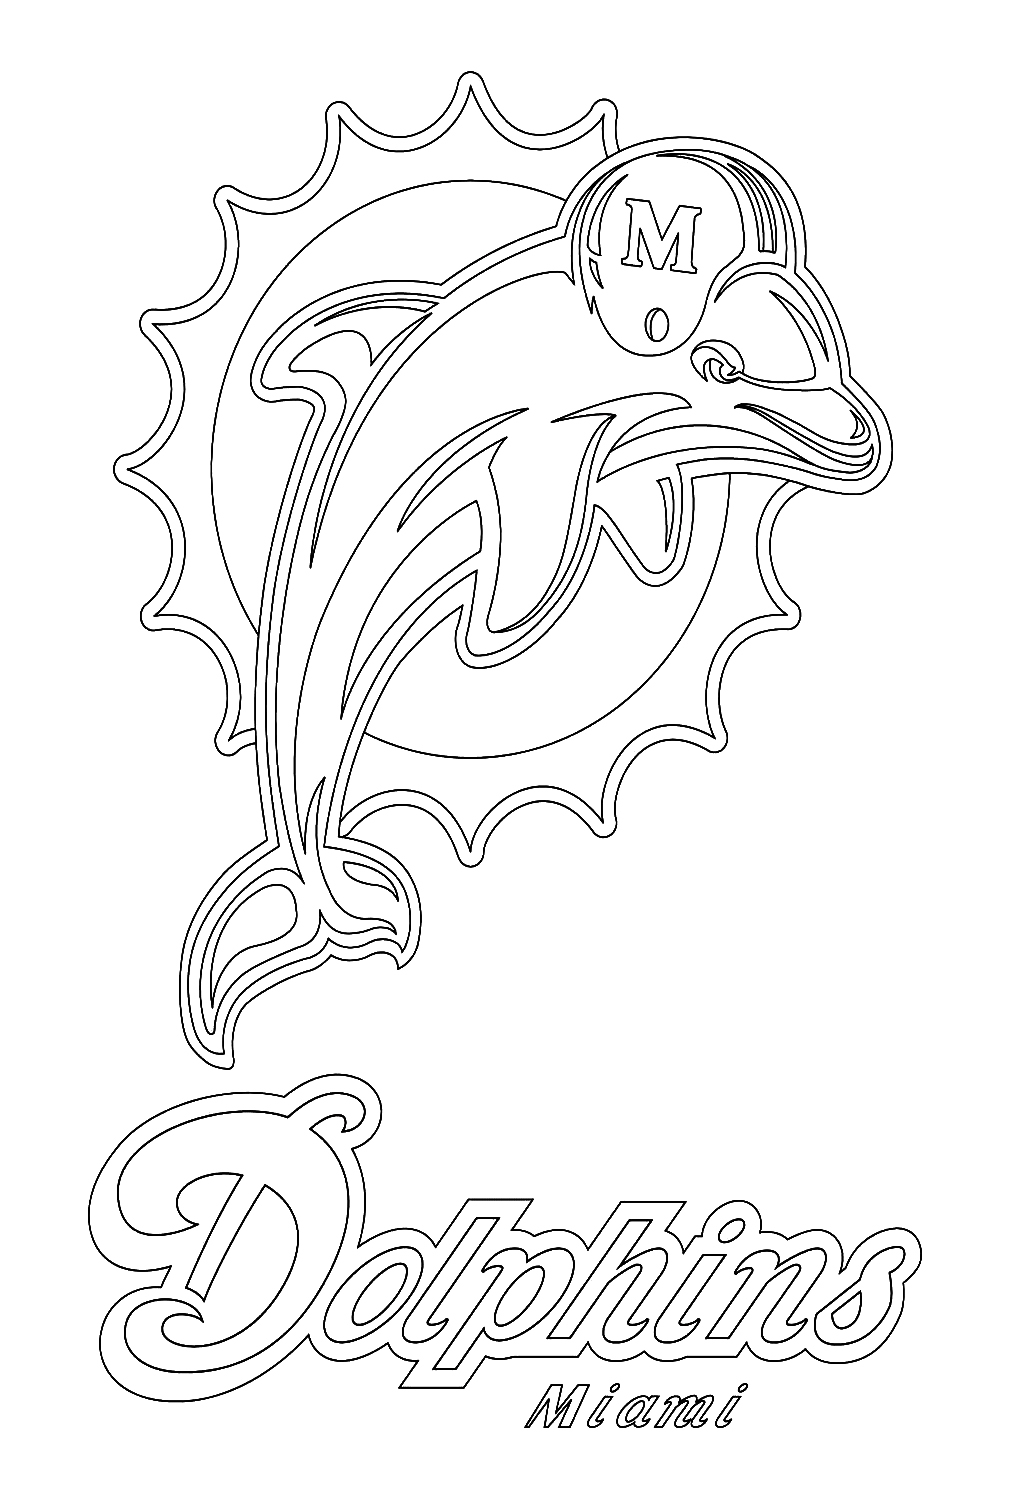 Miami Dolphins Logo Coloring Page